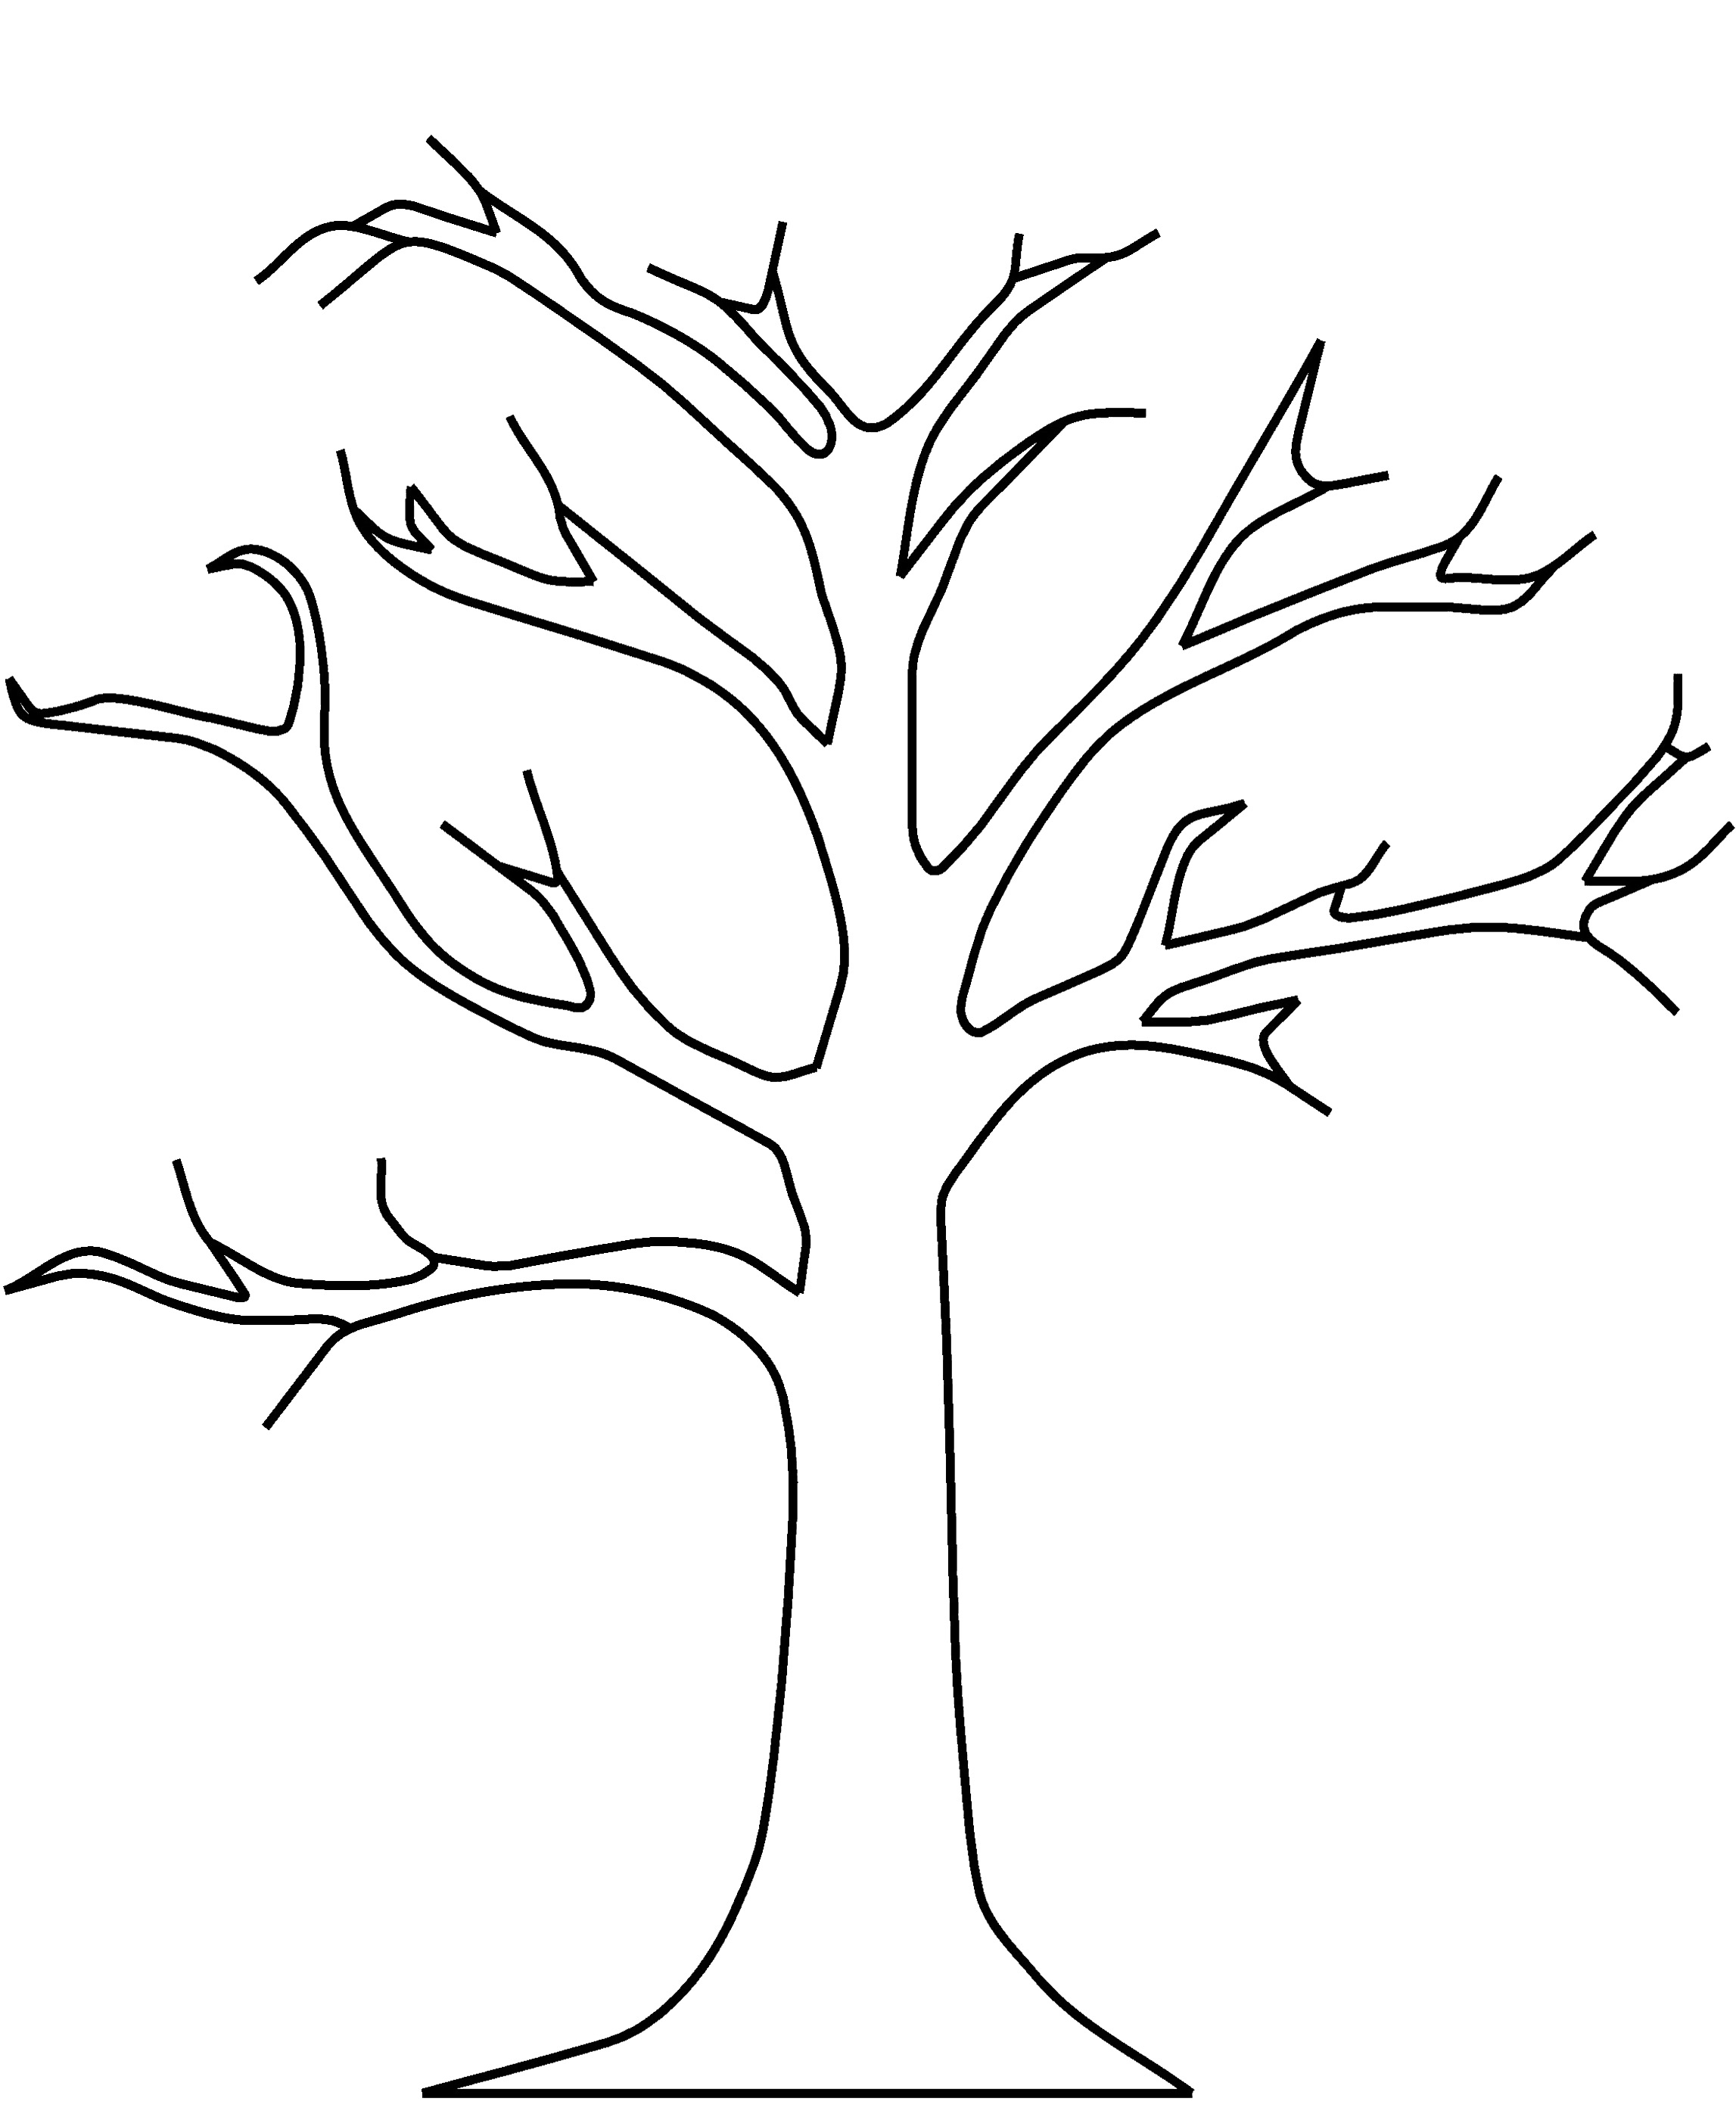 Outline Of A Tree 5